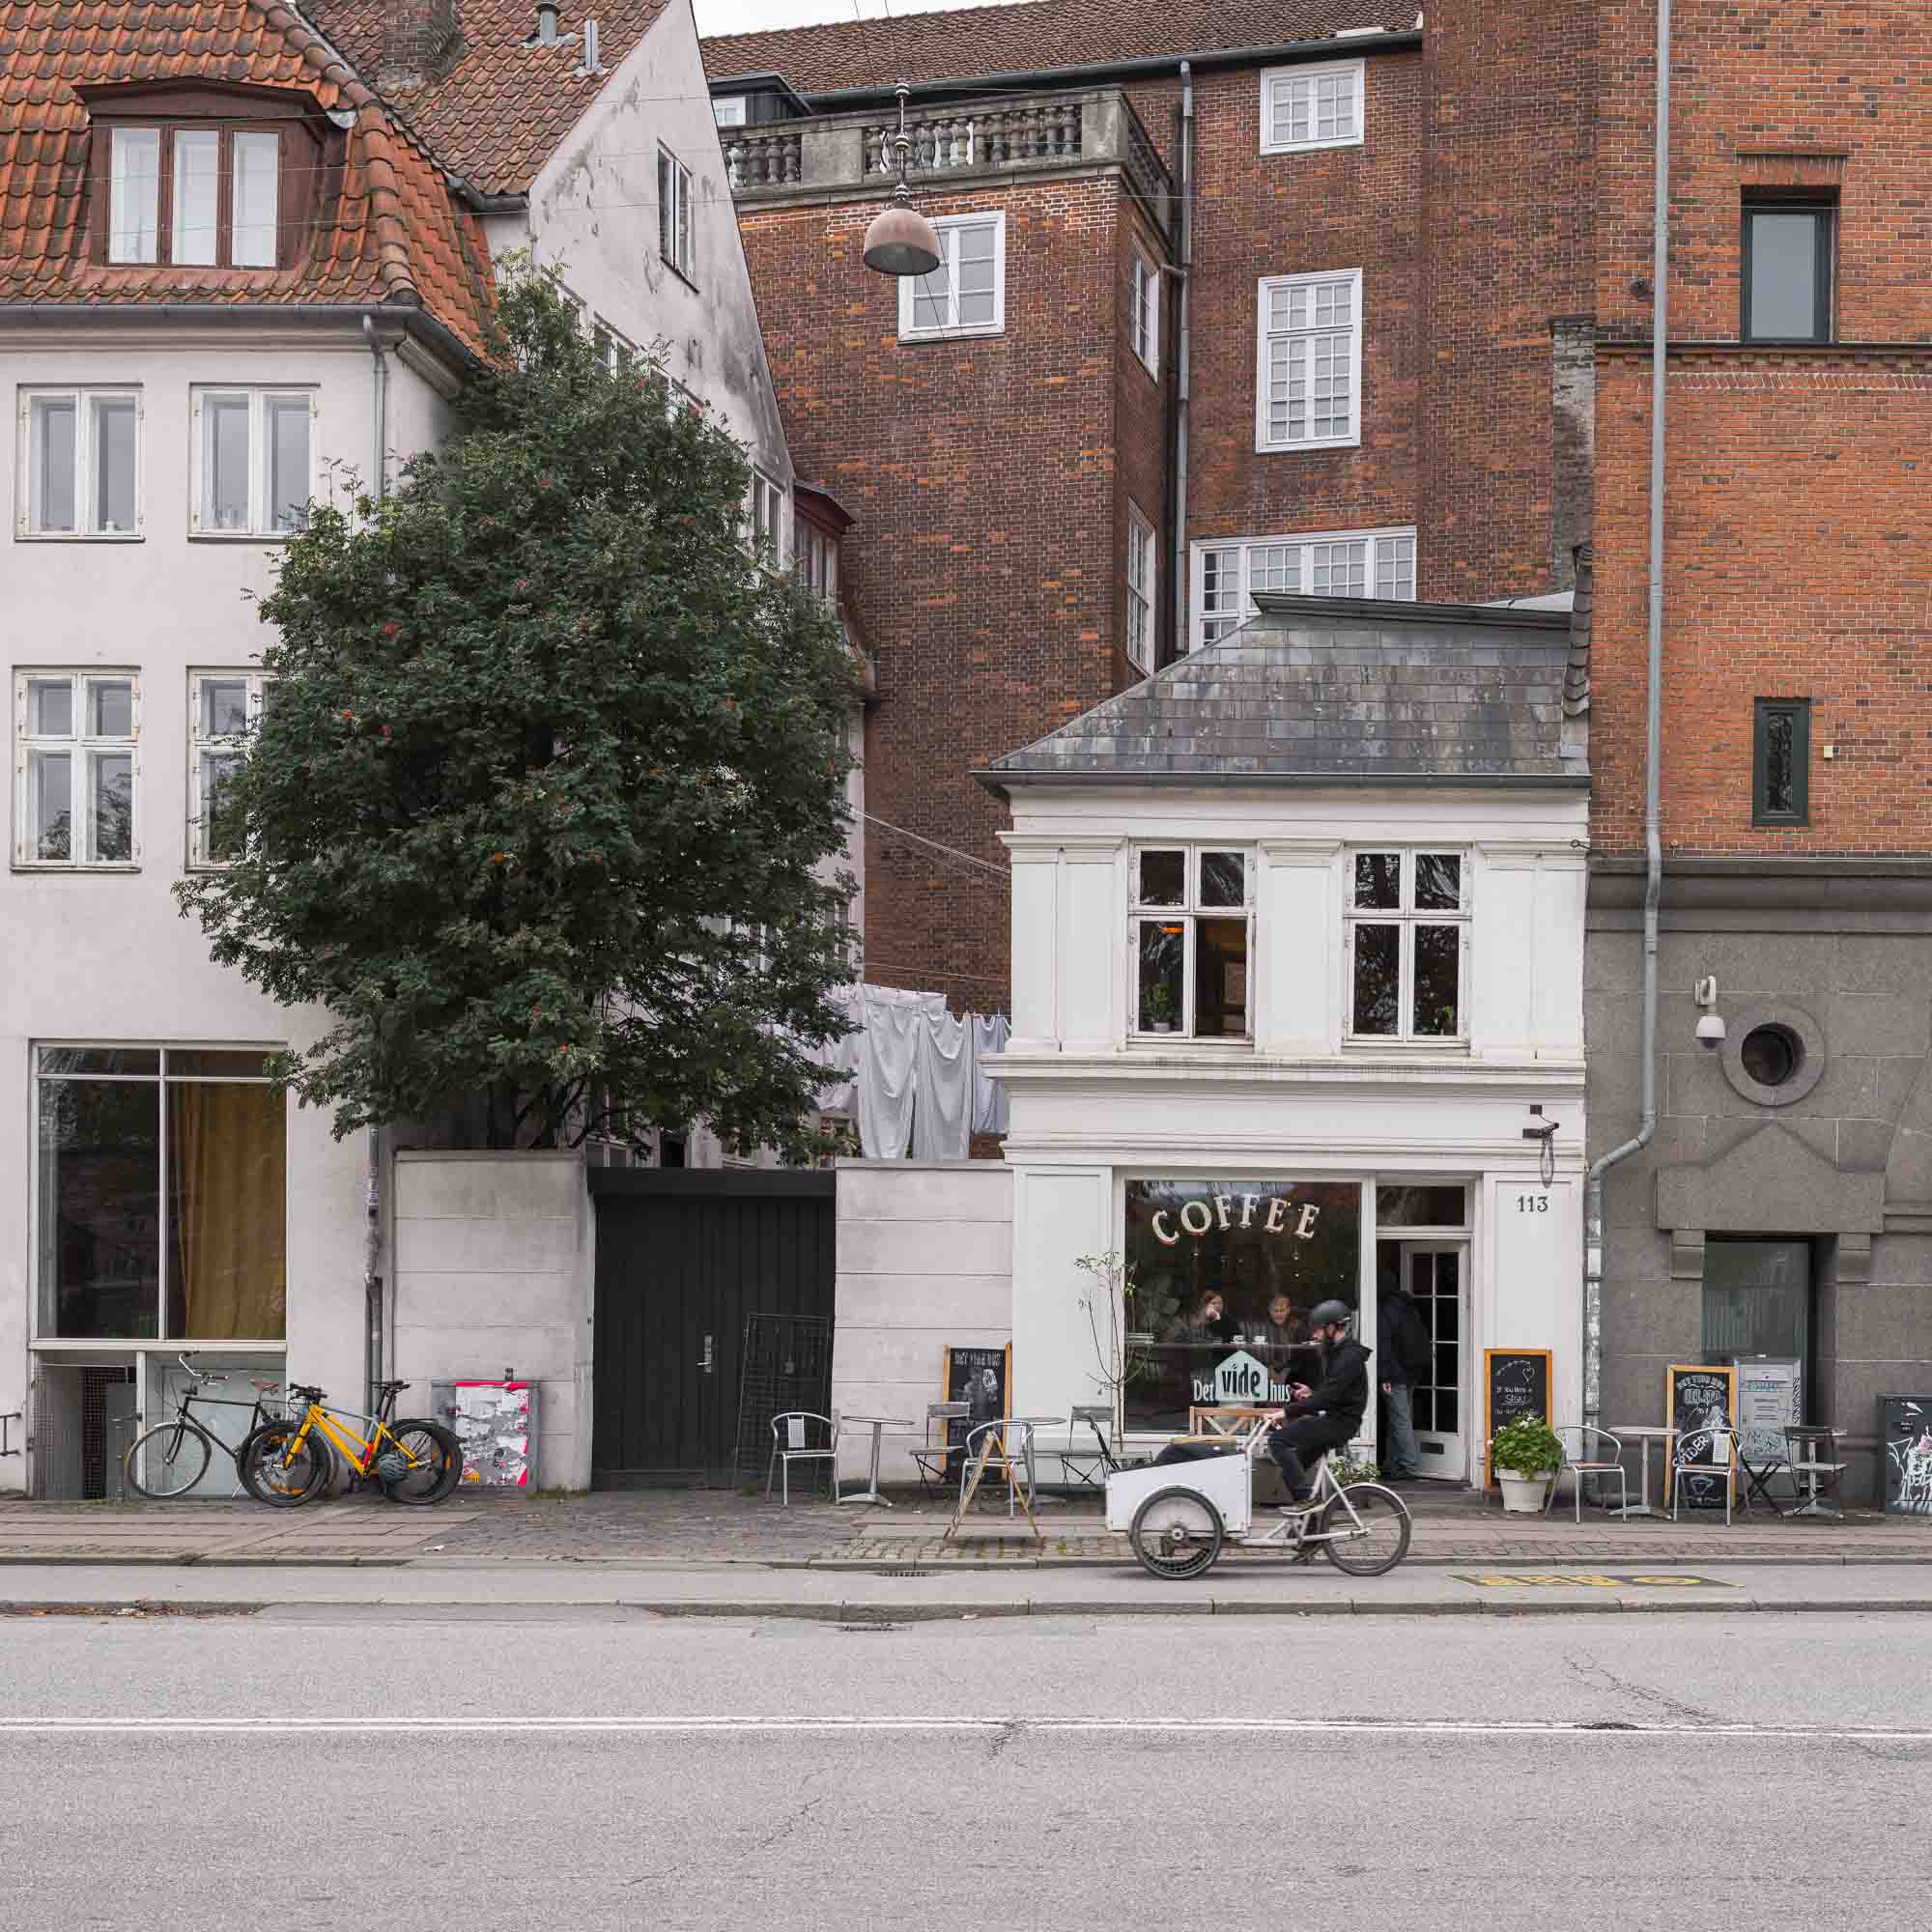 A cozy café sits nestled between classic Copenhagen buildings, with bicycles parked outside, invoking the city's relaxed urban atmosphere.